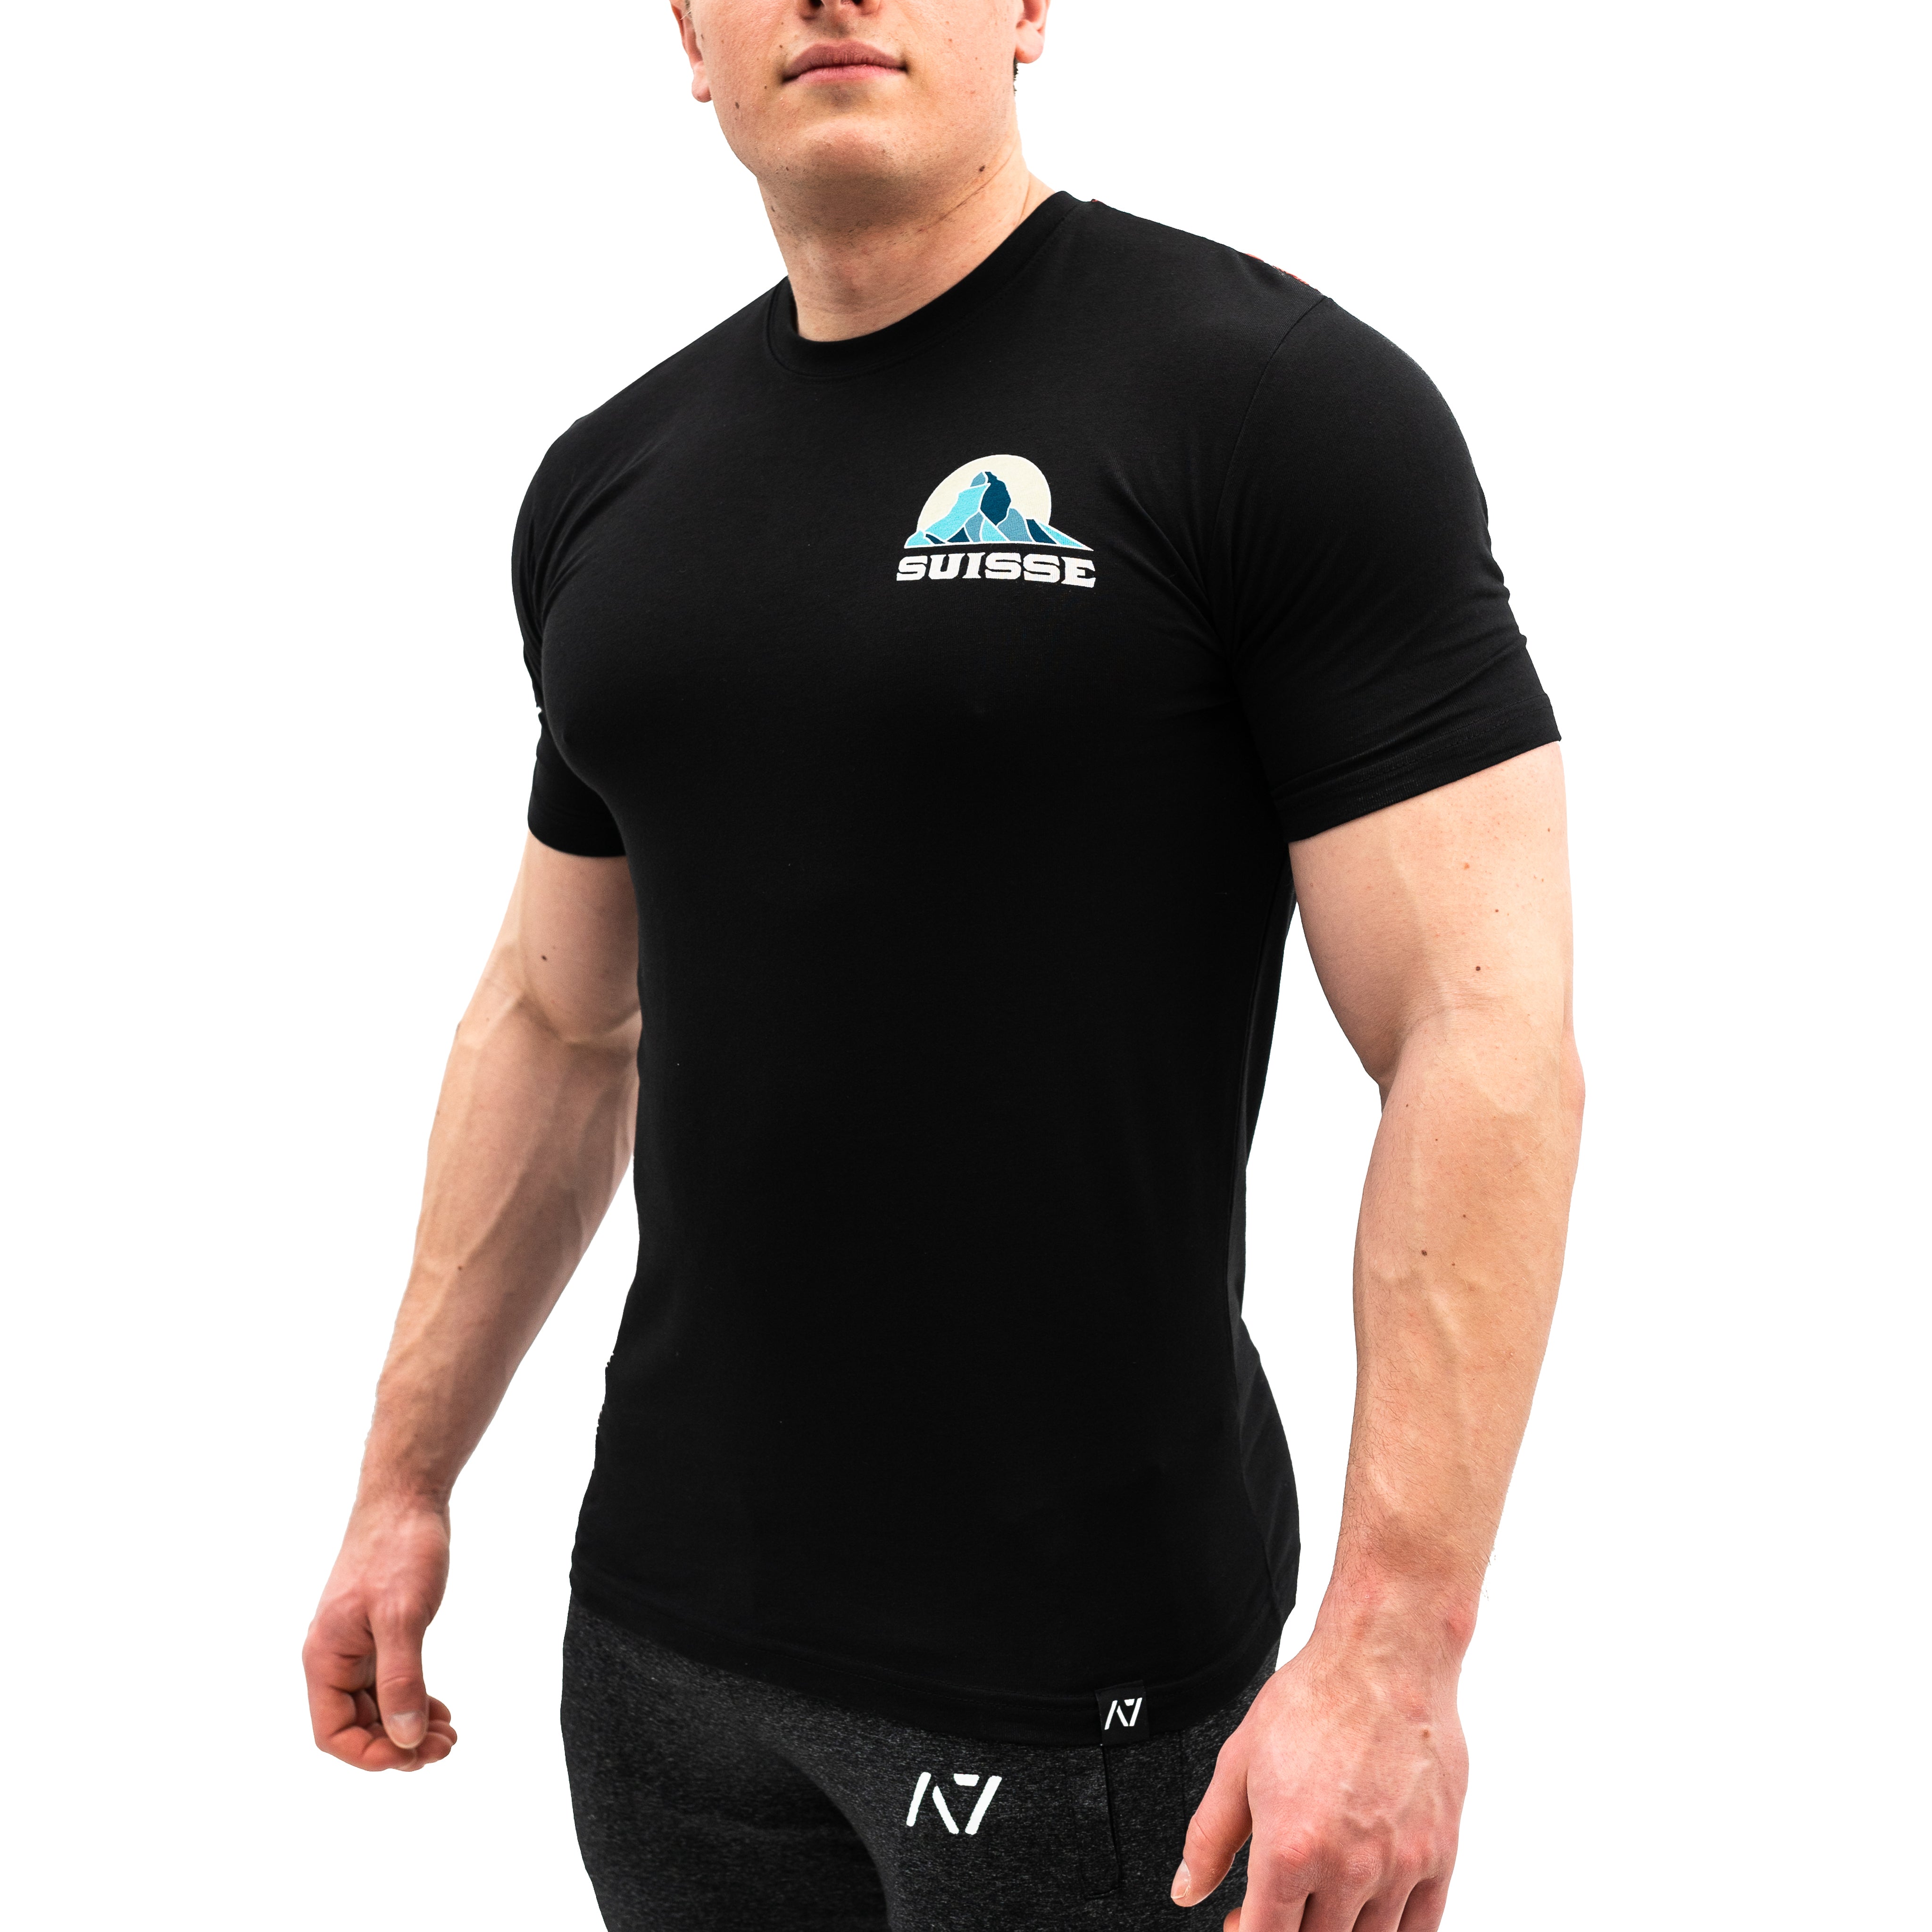 A7 Switzerland Bar Grip T-shirt, great as a squat shirt. Purchase A7 Switzerland Bar Grip Shirt from A7 UK. Purchase Switzerland Bar Grip Shirt Europe from A7 Europe. No more chalk and no more sliding. Best Bar Grip T shirts, shipping to UK and Europe from A7 UK. A7 Switzerland Bar Grip Shirt  great for powerlifting in Switzerland. A7UK has the best Powerlifting apparel for all your workouts. Available in UK and Europe including France, Italy, Germany, the Netherlands, Sweden, Switzerland and Poland.